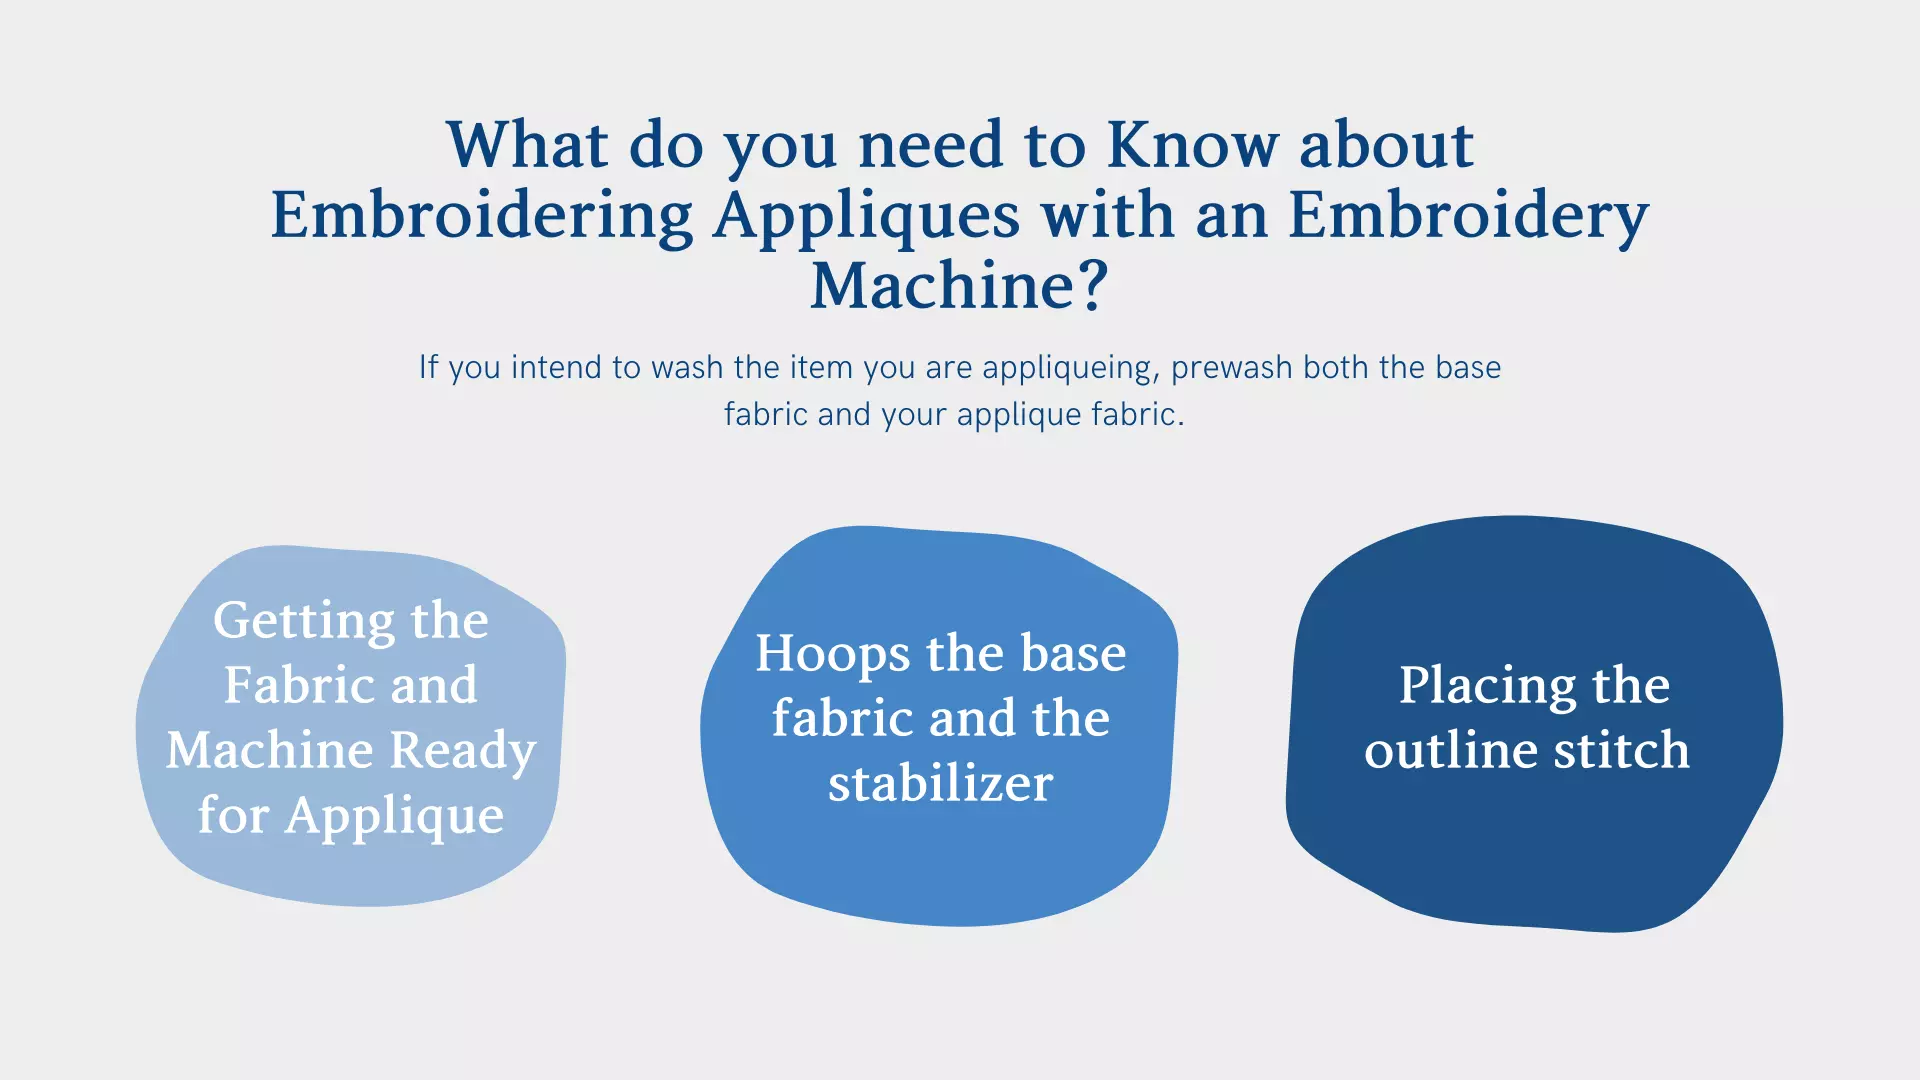 What do you need to Know about Embroidering Appliques with an Embroidery Machine